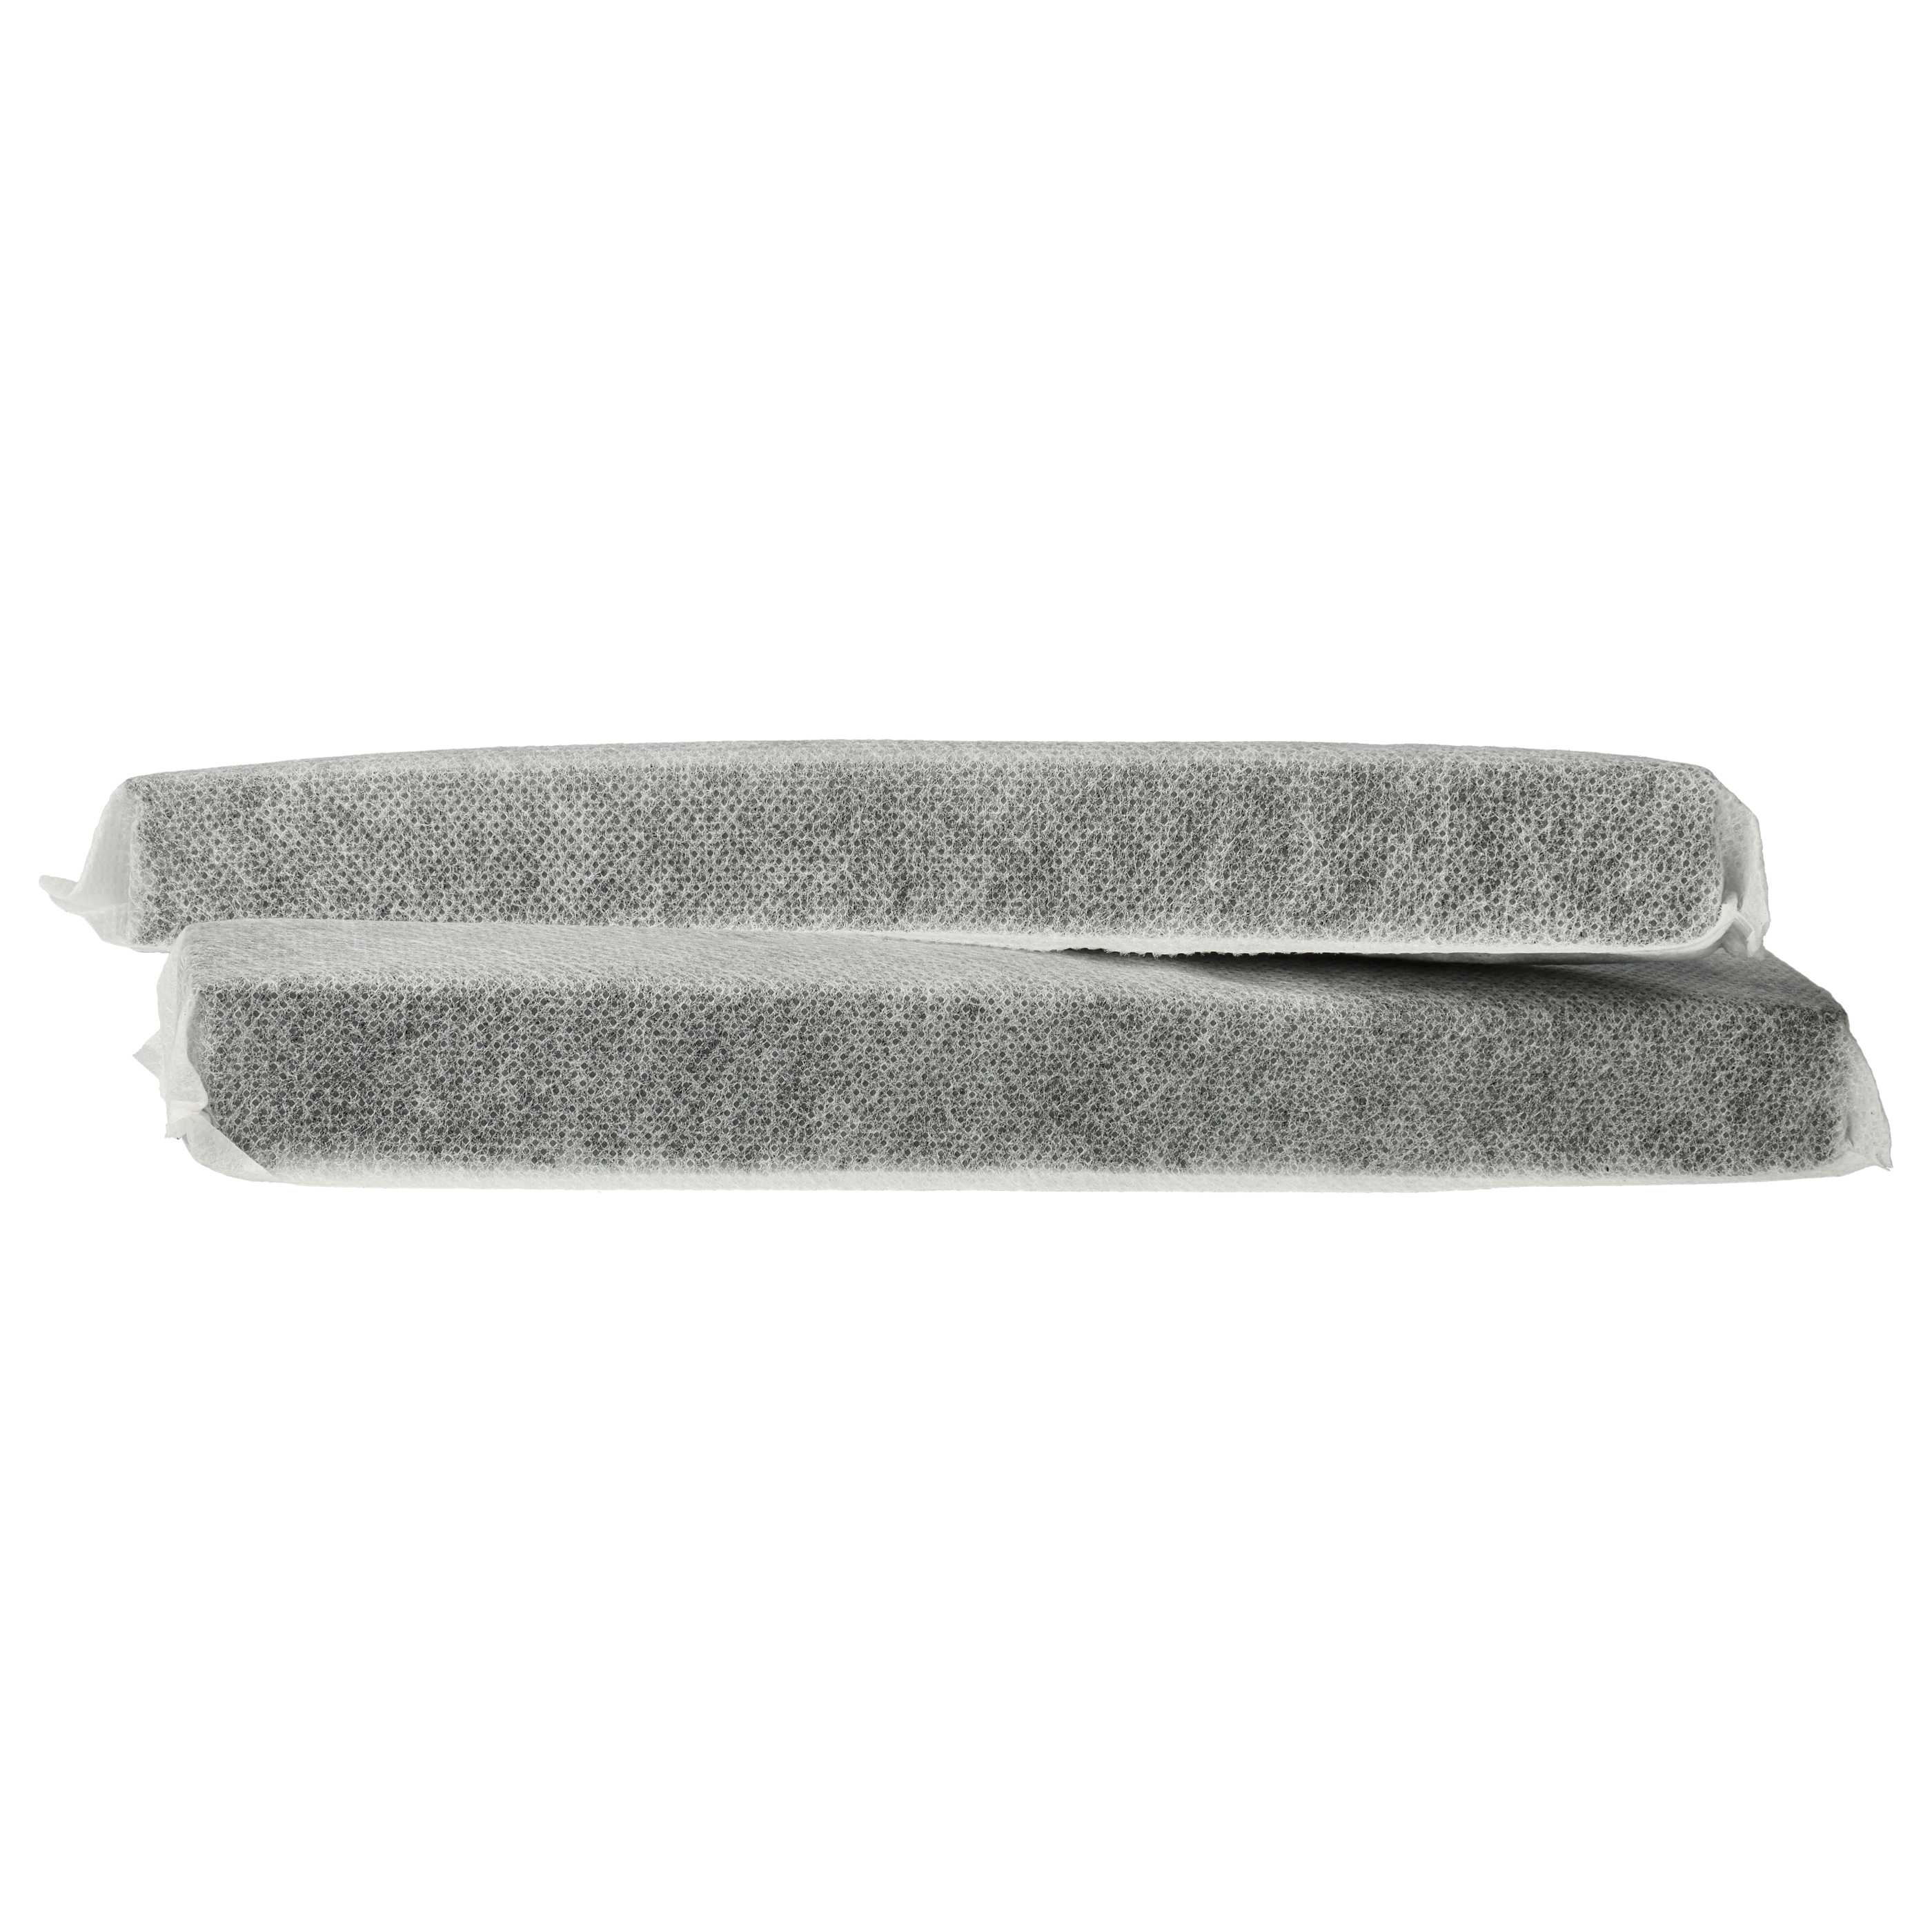 2x Activated Carbon Filter replaces Miele KKF-RF, 7236280 for Miele Refrigerator